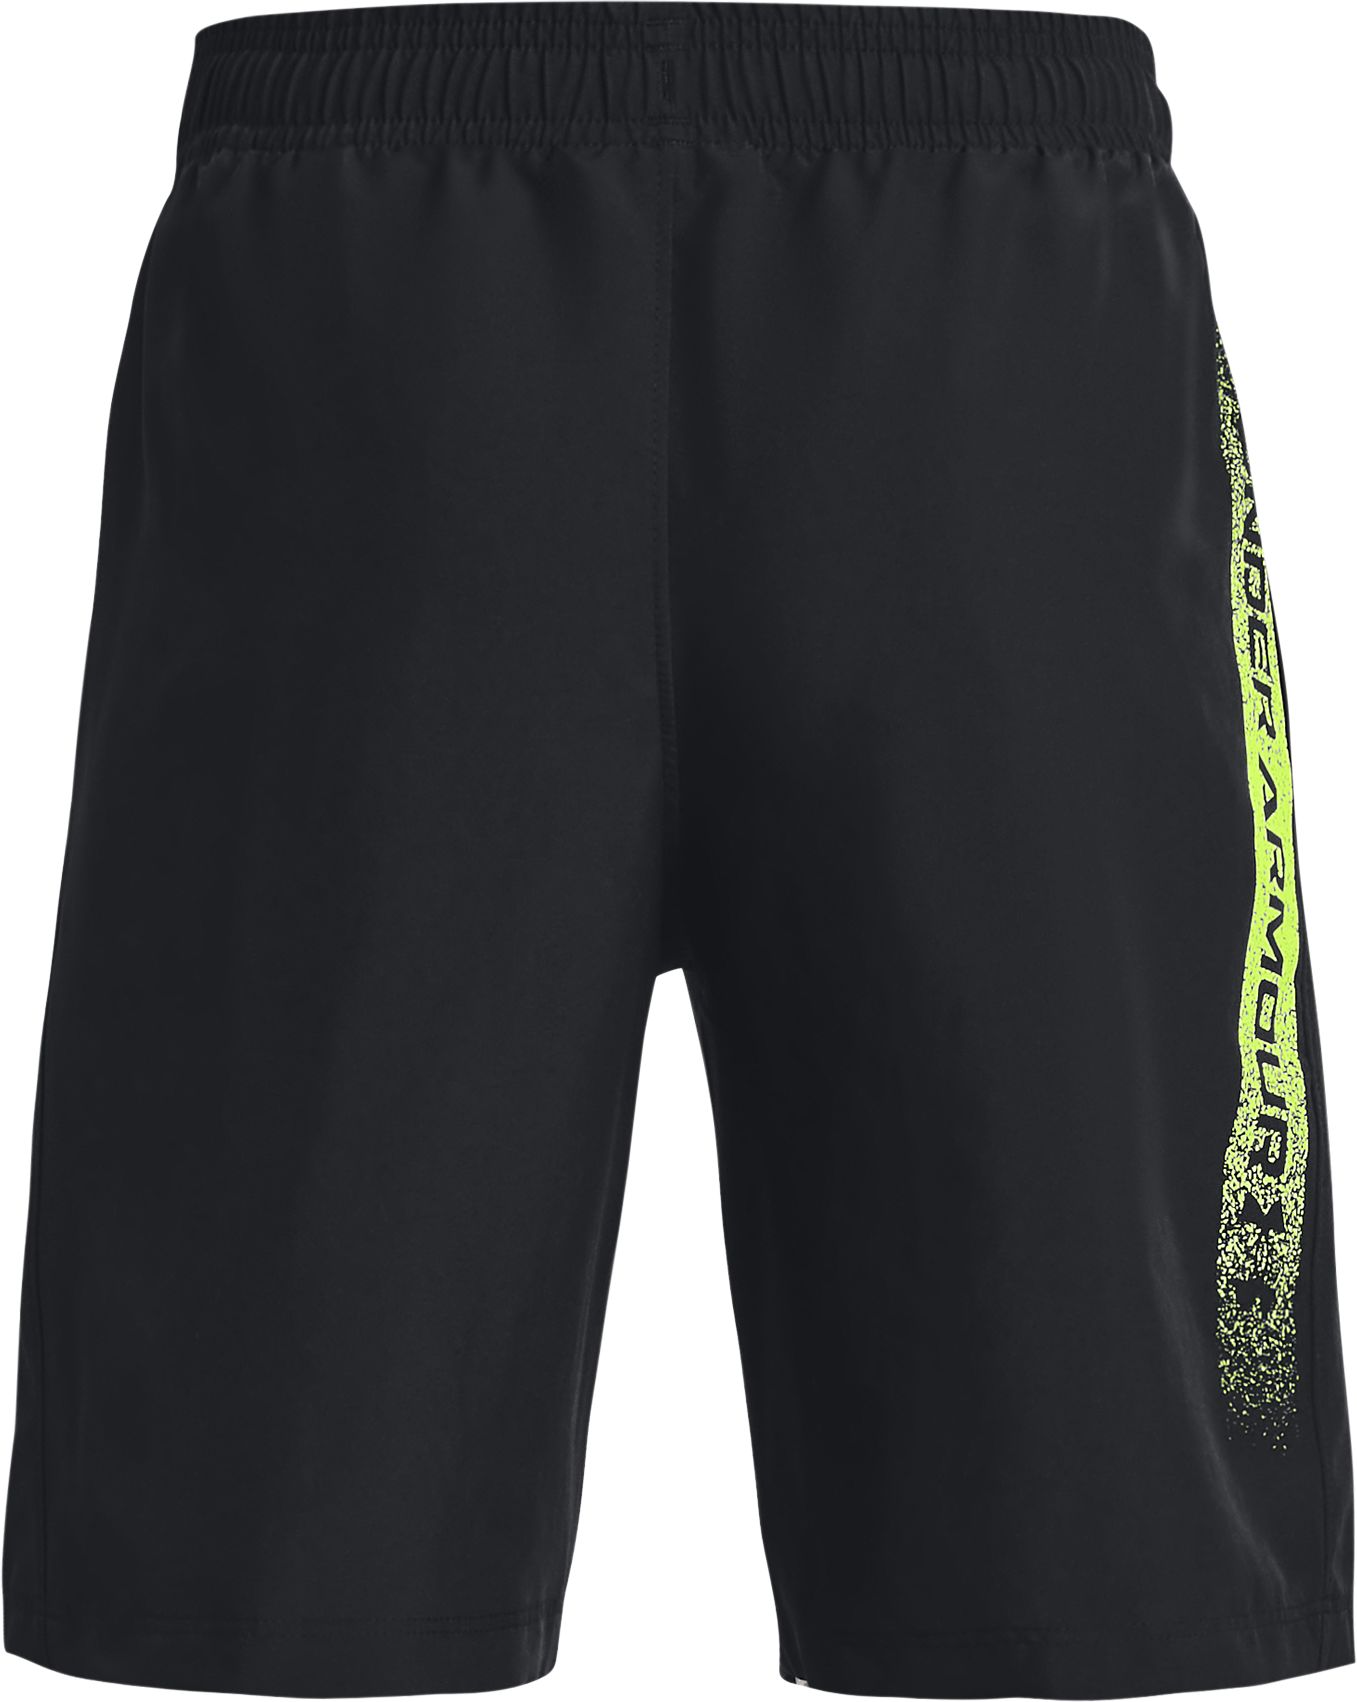 UNDER ARMOUR, J WOVEN GRAPHIC SHORTS